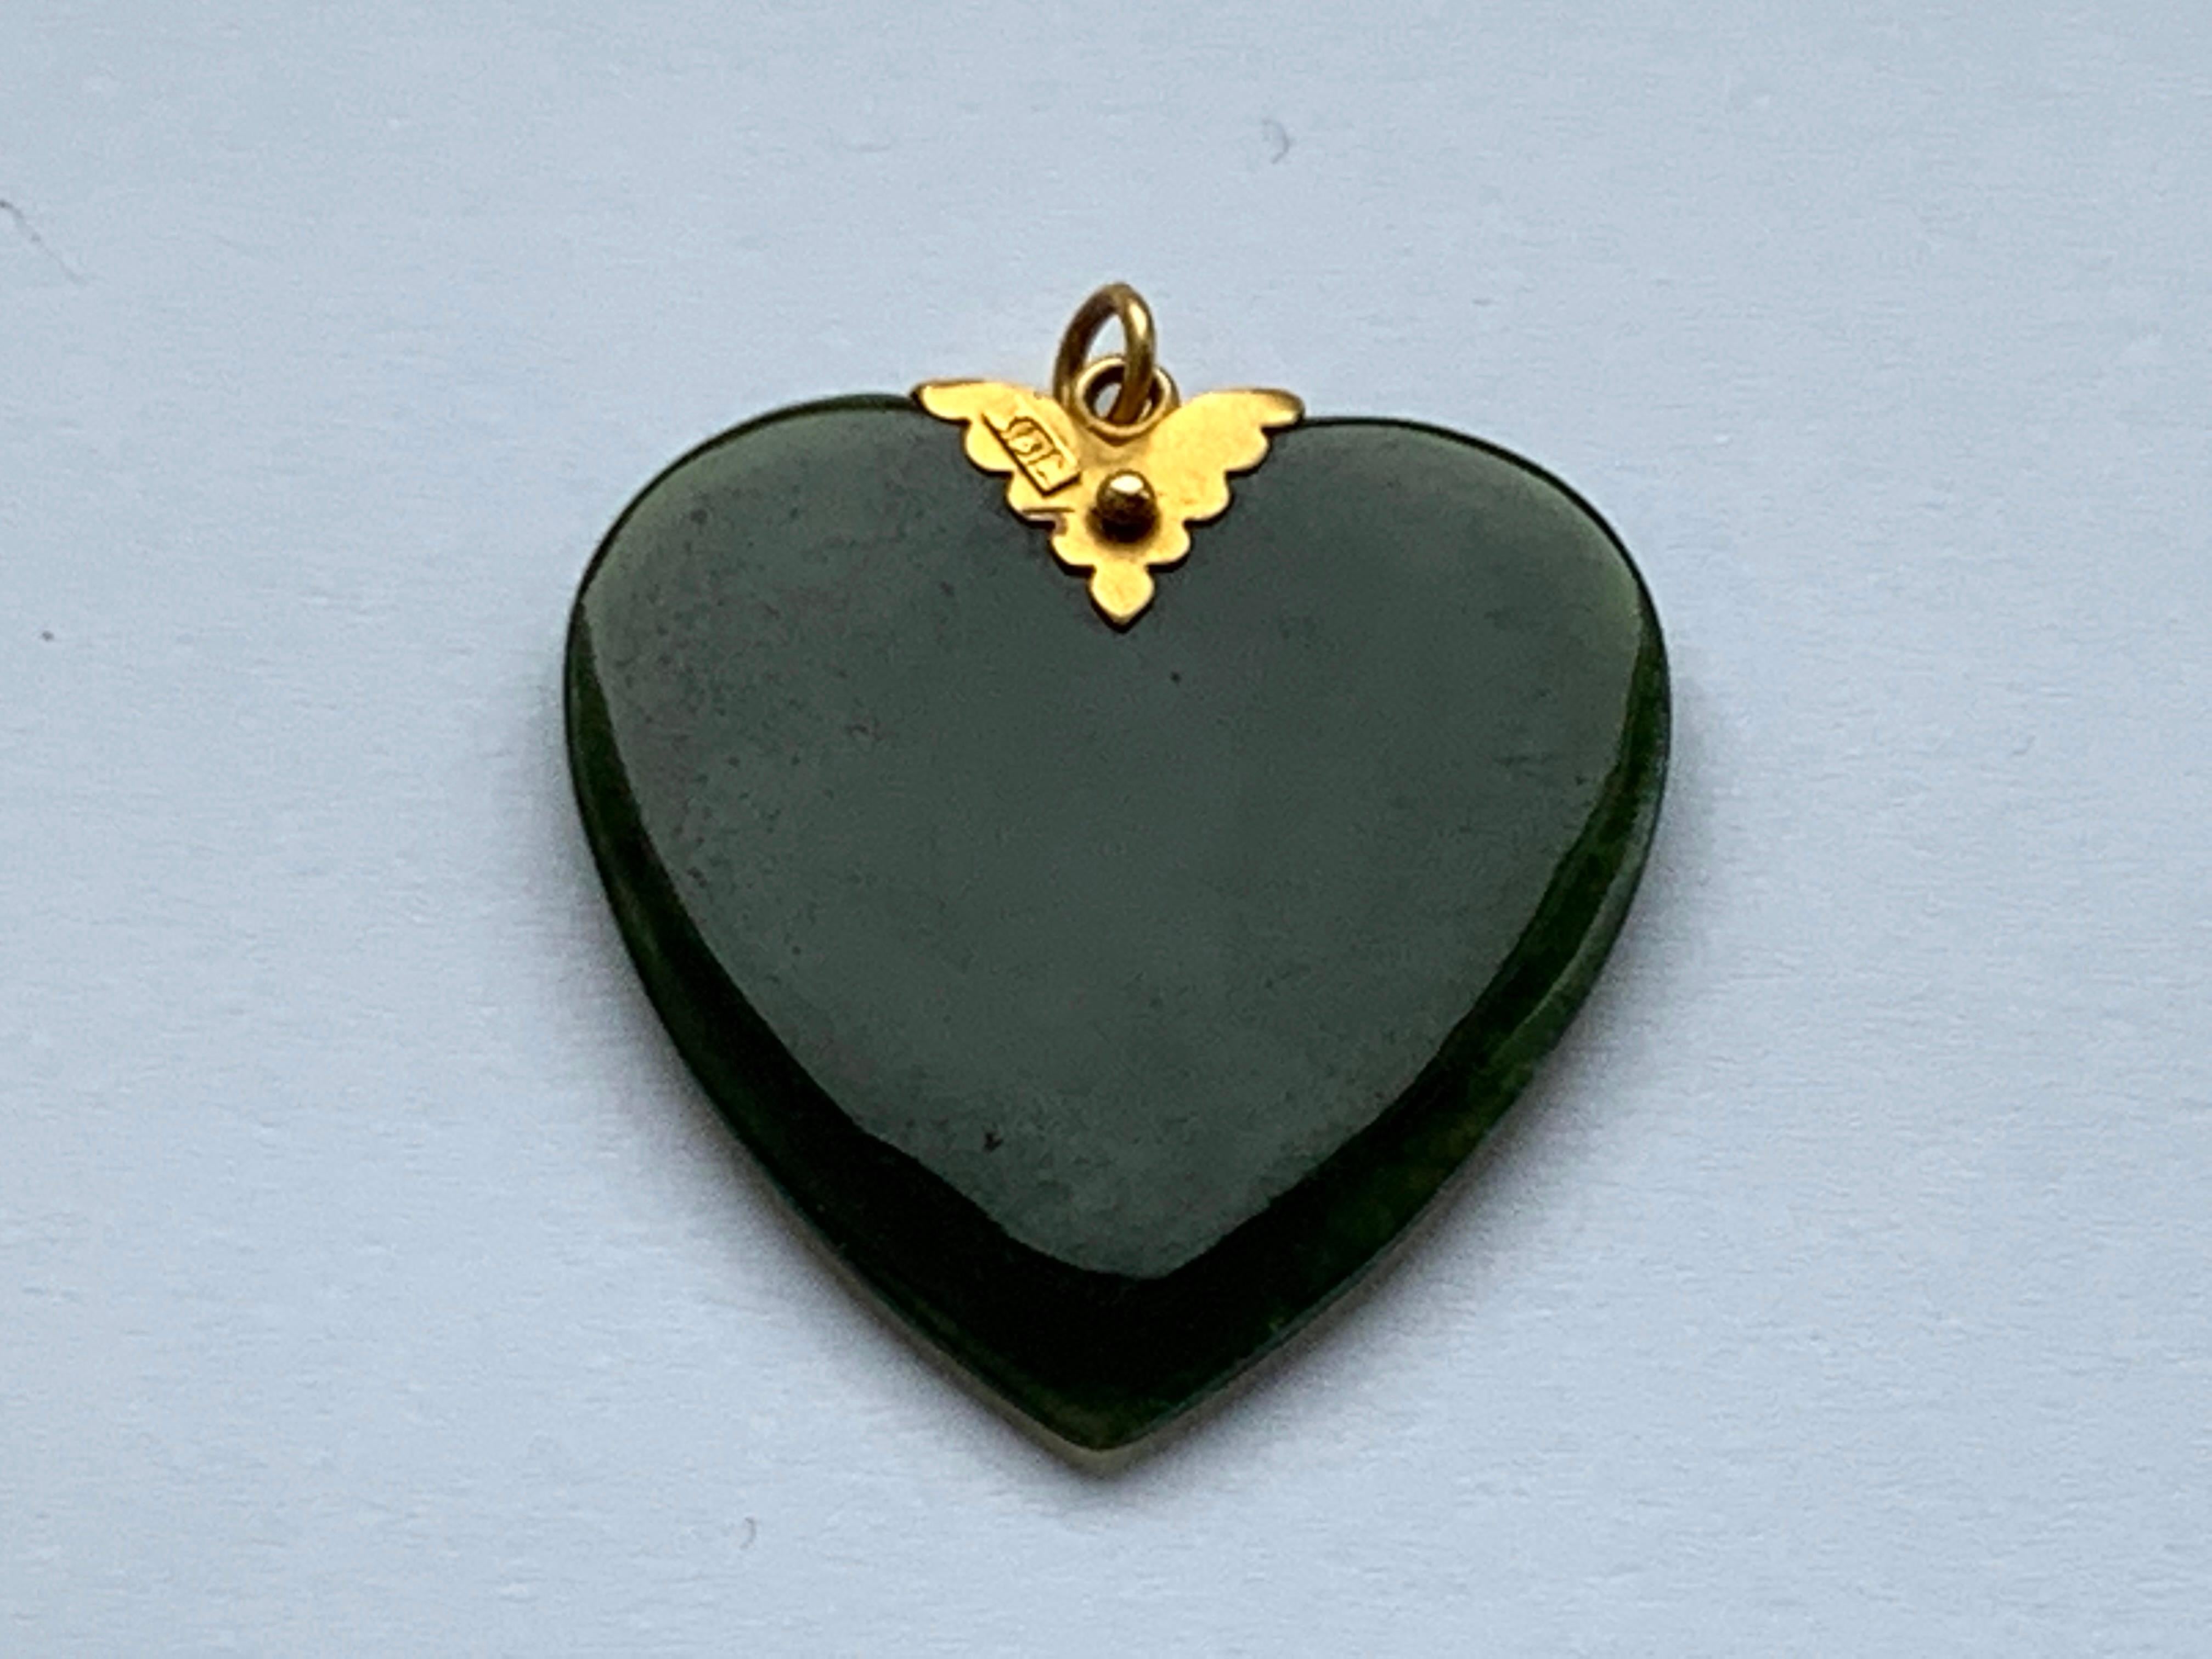 Antique
Dark Green Jade Heart
with 9ct Gold Bail & collar
Stamped 9c

Size 3.5 cm x 4 cm
(cm = centimeters )

Weight 9.3 grams

Condition - very good 